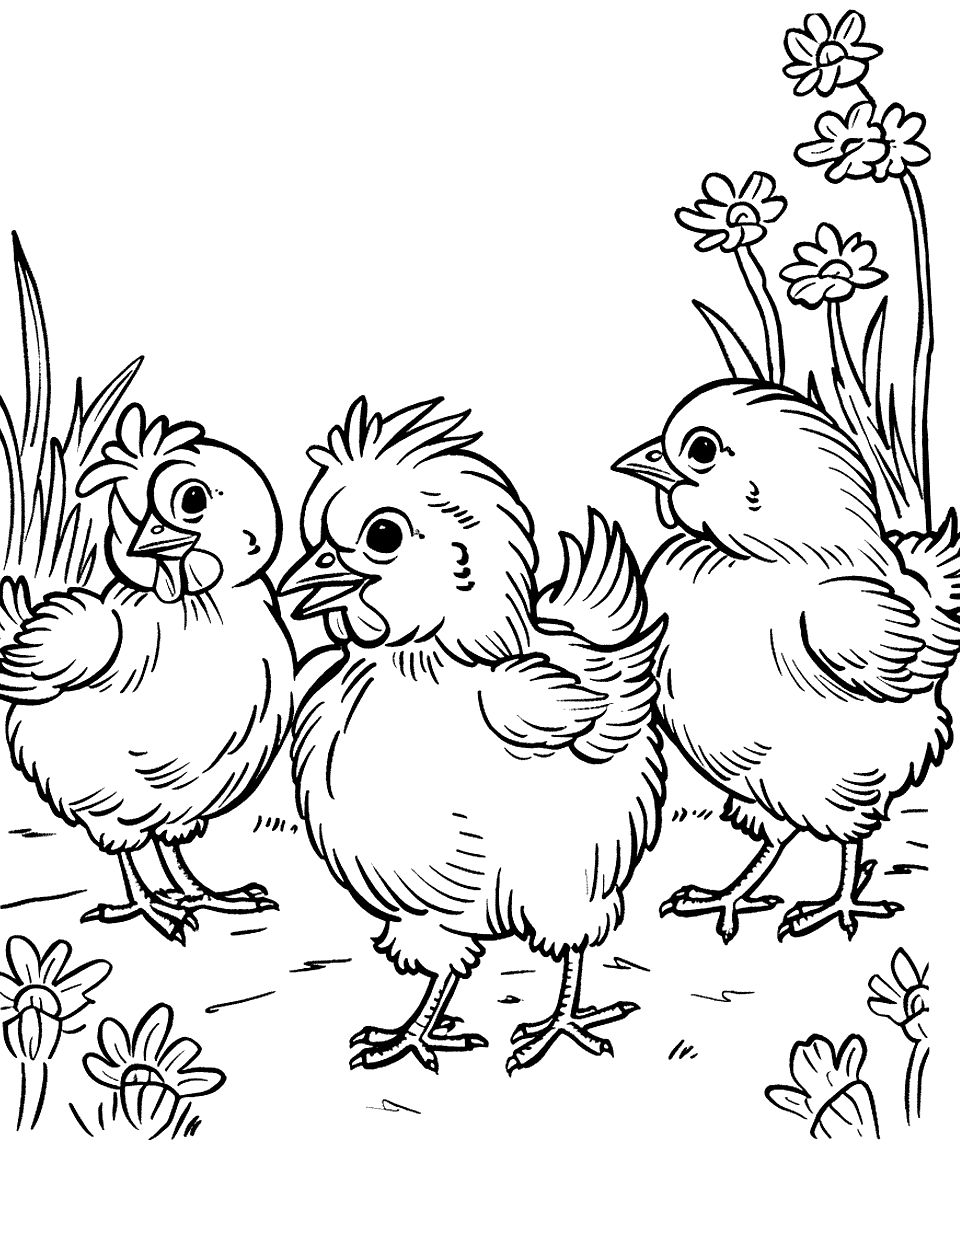 Chicks Playing in the Yard Chicken Coloring Page - A group of energetic chicks standing together in the yard.